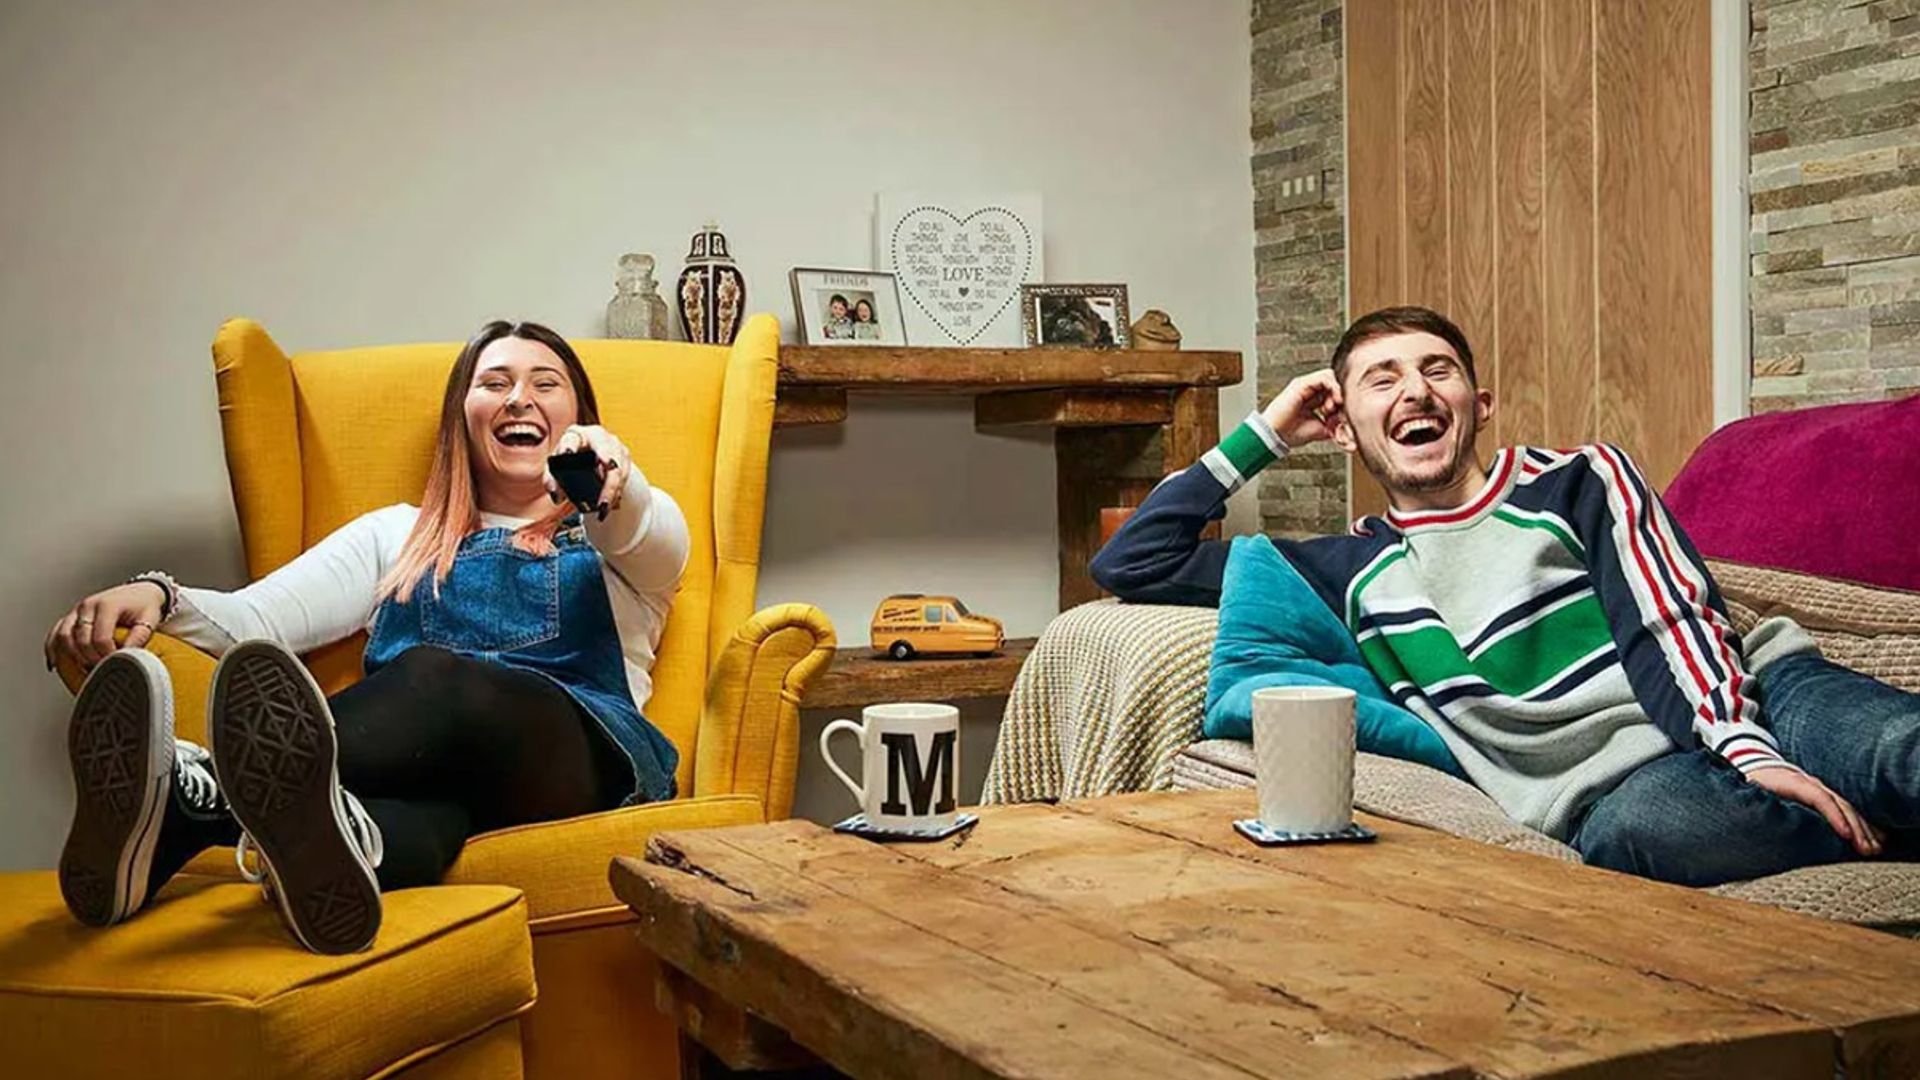 Gogglebox star makes candid admission about not wanting to be on TV